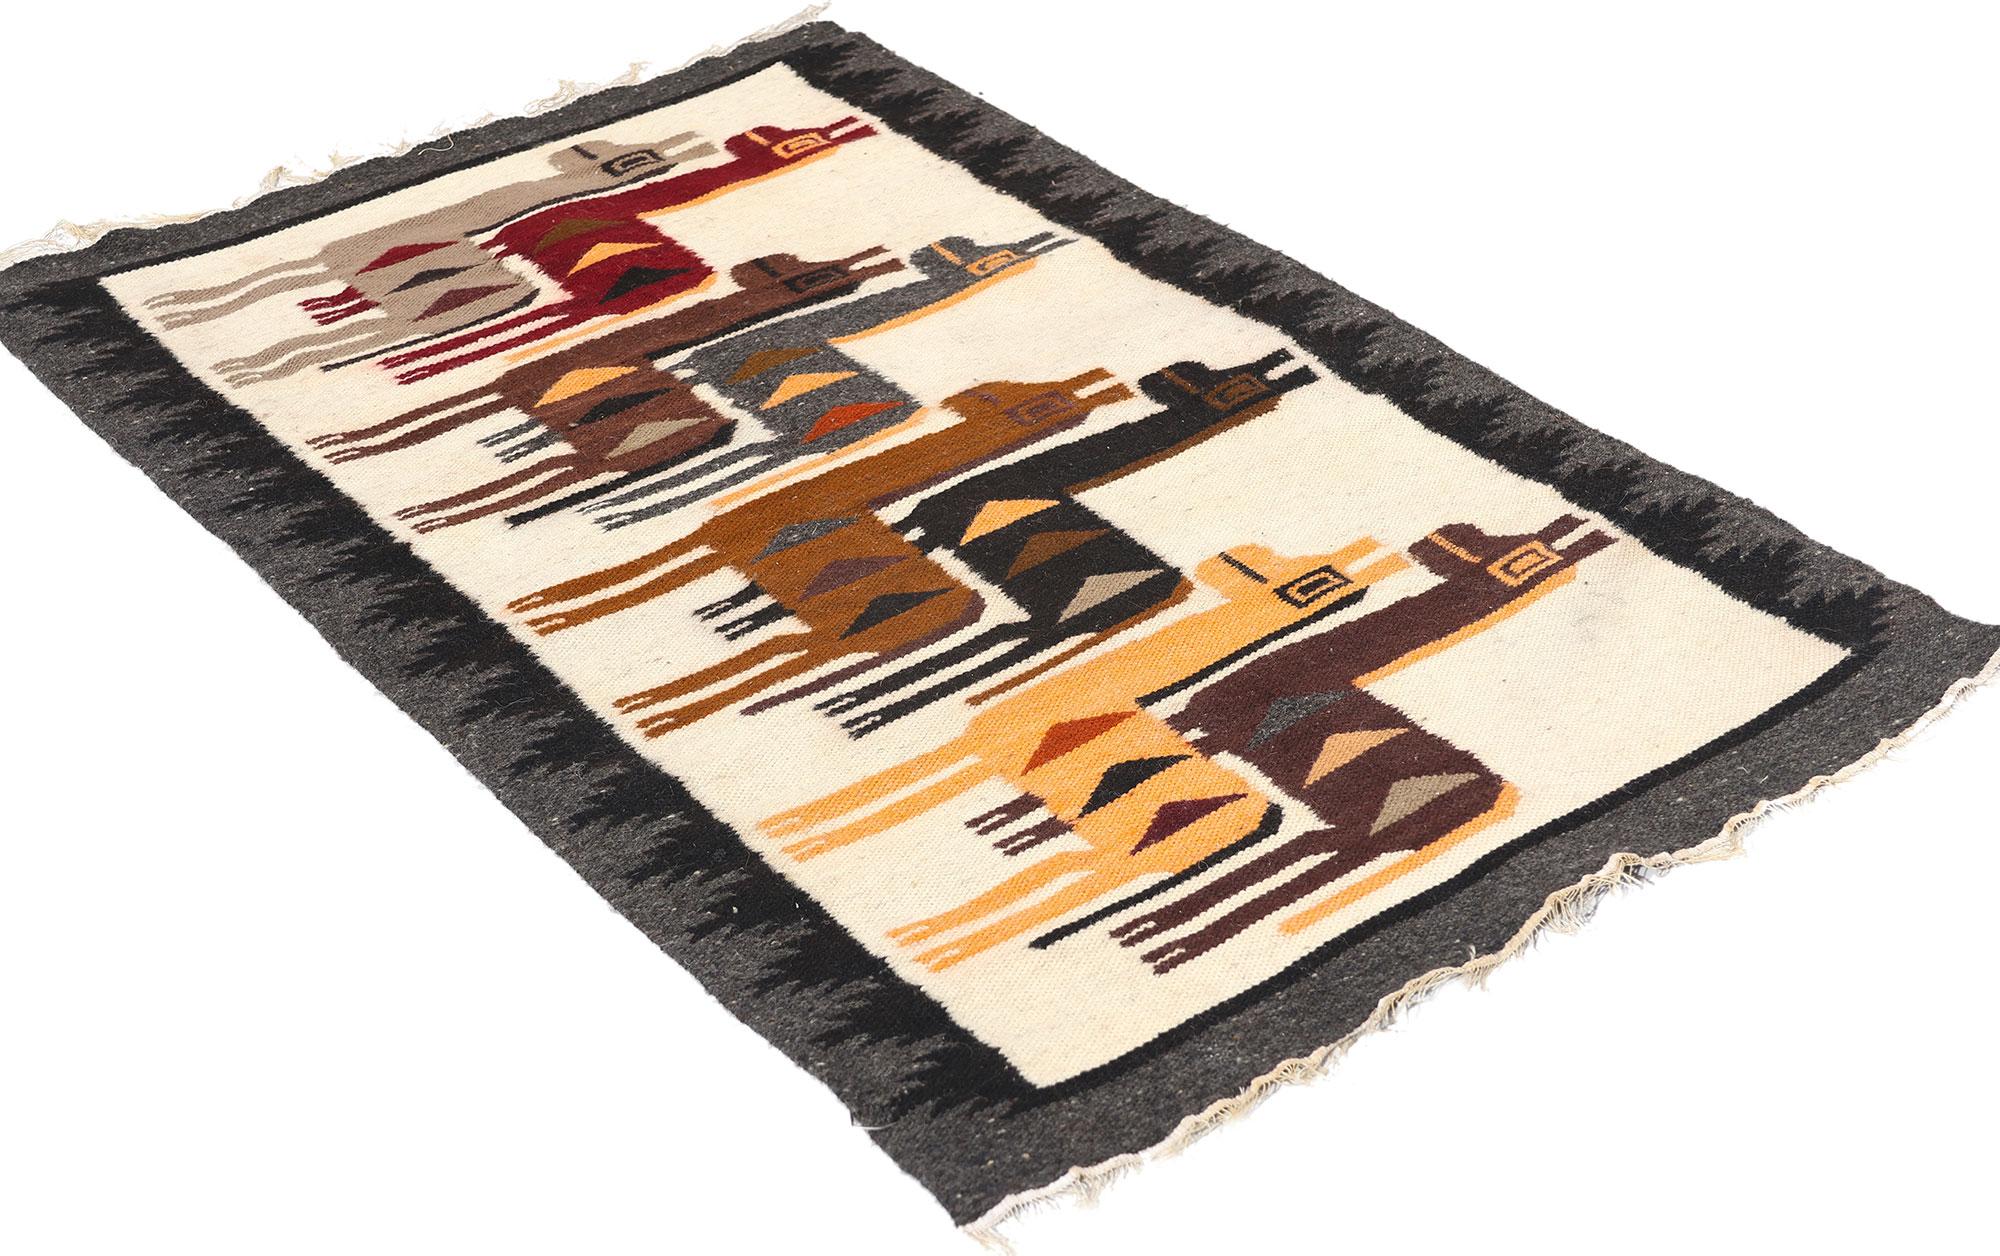 78751 Vintage Peruvian Alpaca Pictorial Kilim Rug, 02'01 x 03'03. South American Peruvian pictorial kilim rugs are distinctive textiles originating from Peru, blending traditional Andean weaving techniques with contemporary designs. Handwoven by